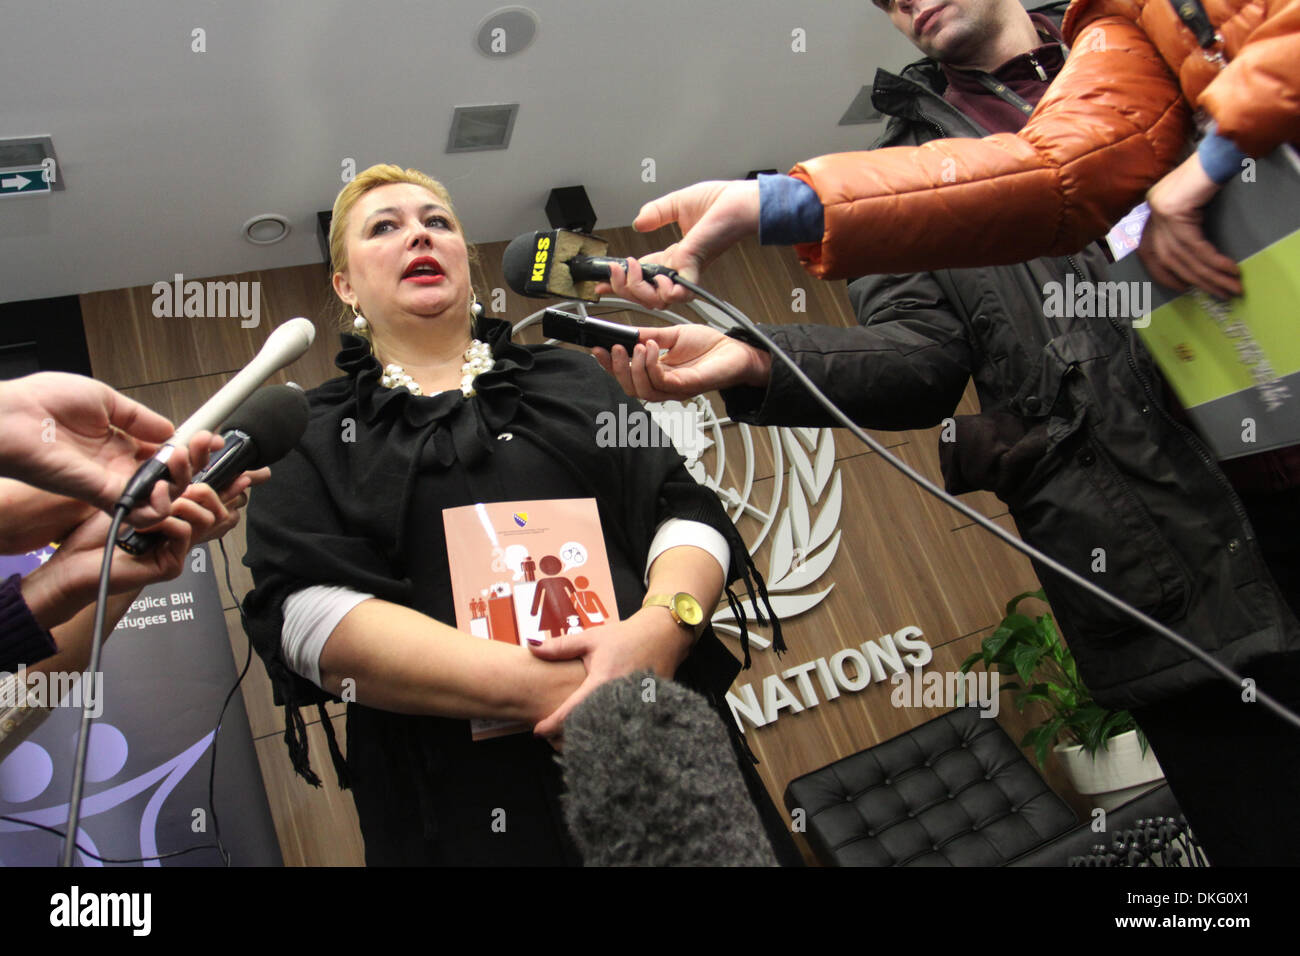 Sarajevo, Bosnia-Herzegovina. 5th Dec, 2013. Samra Filipovic Hadziabdic, Director of the State Agency for Gender Equality, gives statement to medias during the conferrence on 'Violence Against Women', in the building of UN House, in Sarajevo, Bosnia-Herzegovina, on Dec. 5, 2013. Credit:  Haris Memija/Xinhua/Alamy Live News Stock Photo